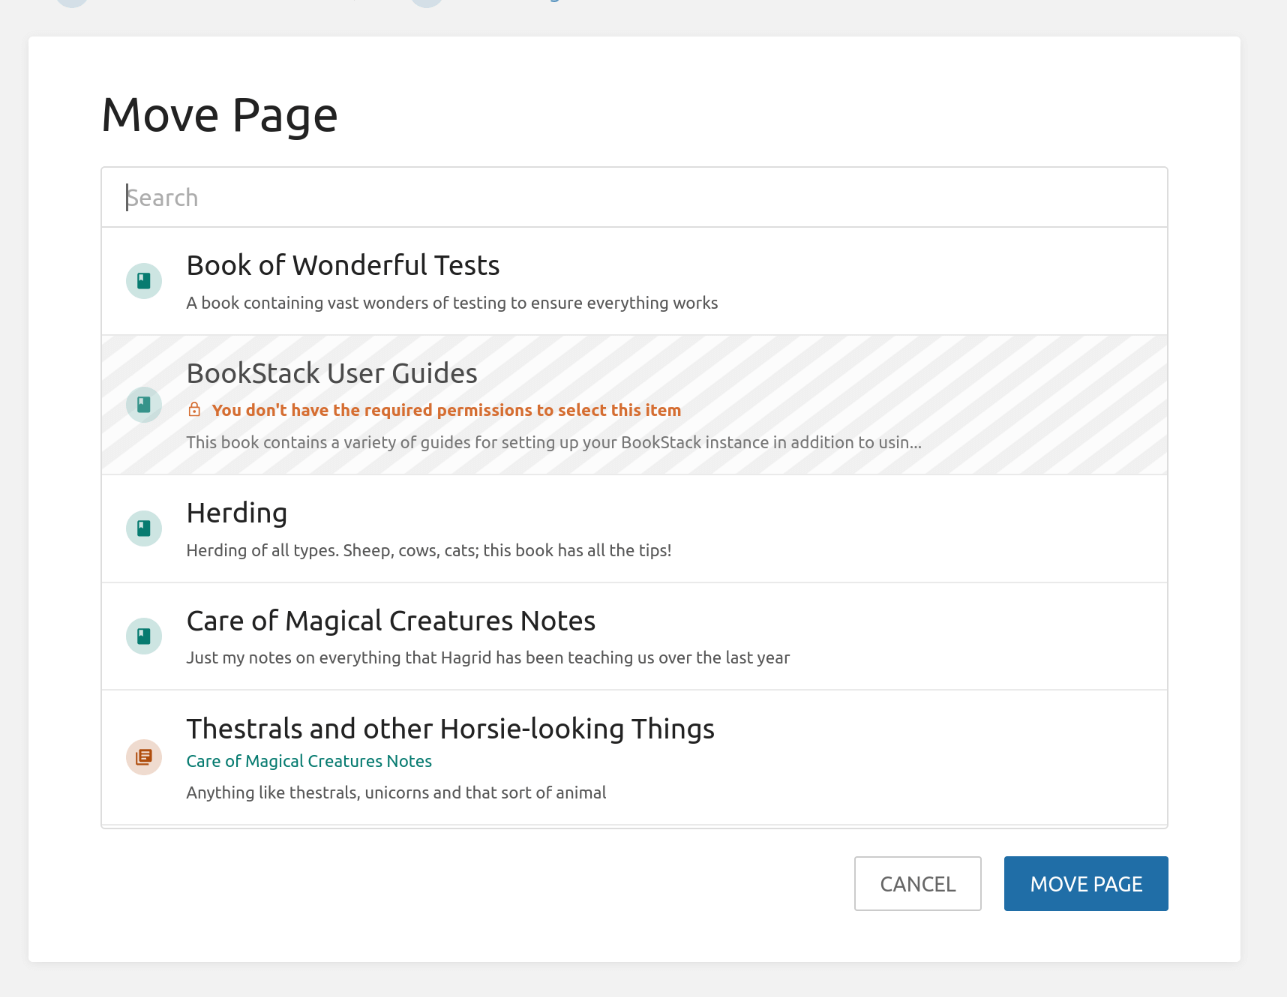 Move page view with a parent book option showing a warning about lacking permission